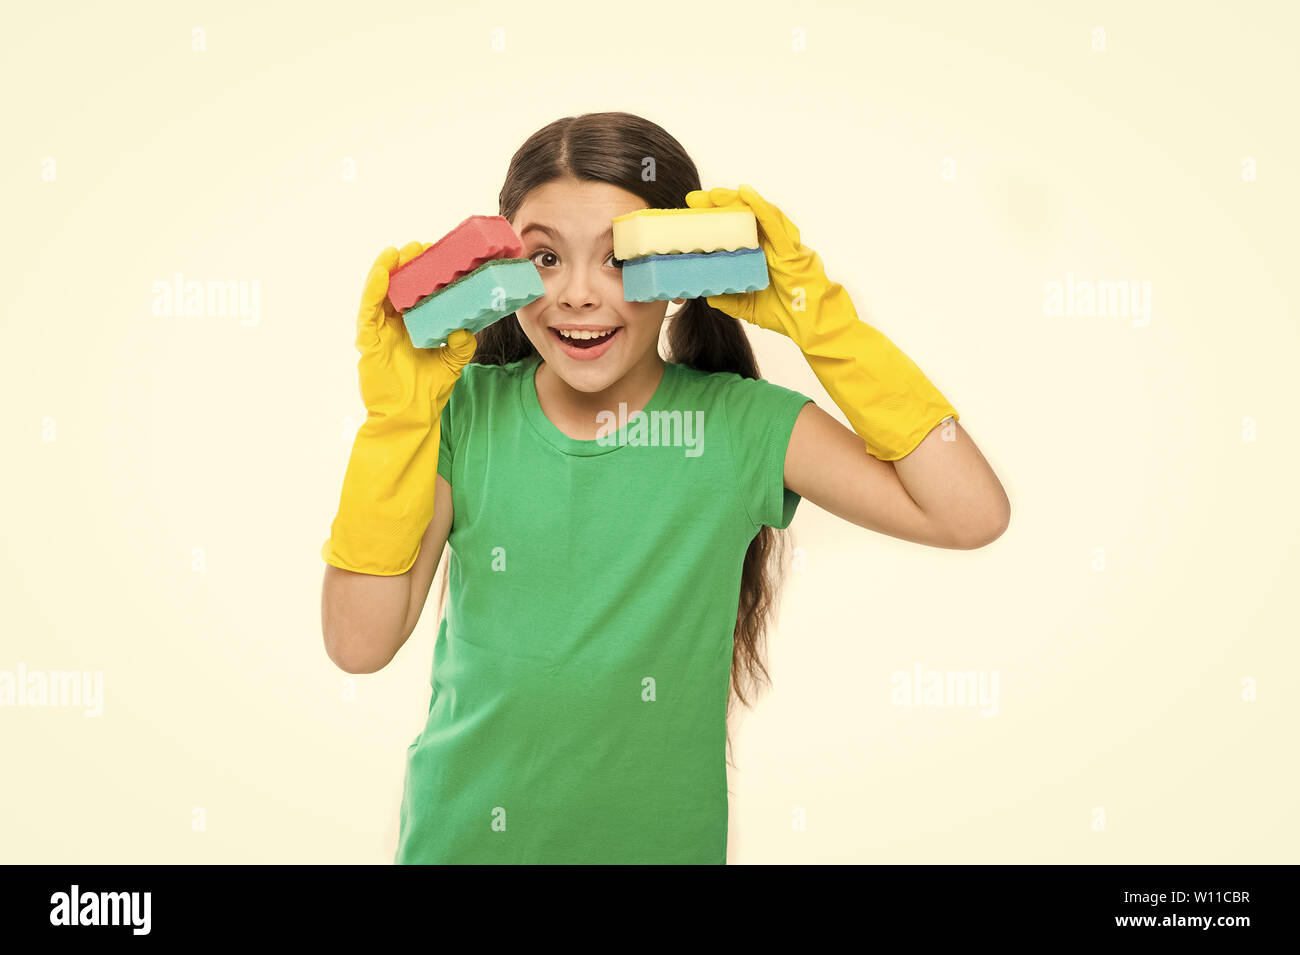 Set of cleaning sponges for her needs. Little housemaid ready for household help. Cleaning and washing up. Small housekeeper holding dish sponges in rubber gloves. Cute kitchen maid. Household duties. Stock Photo